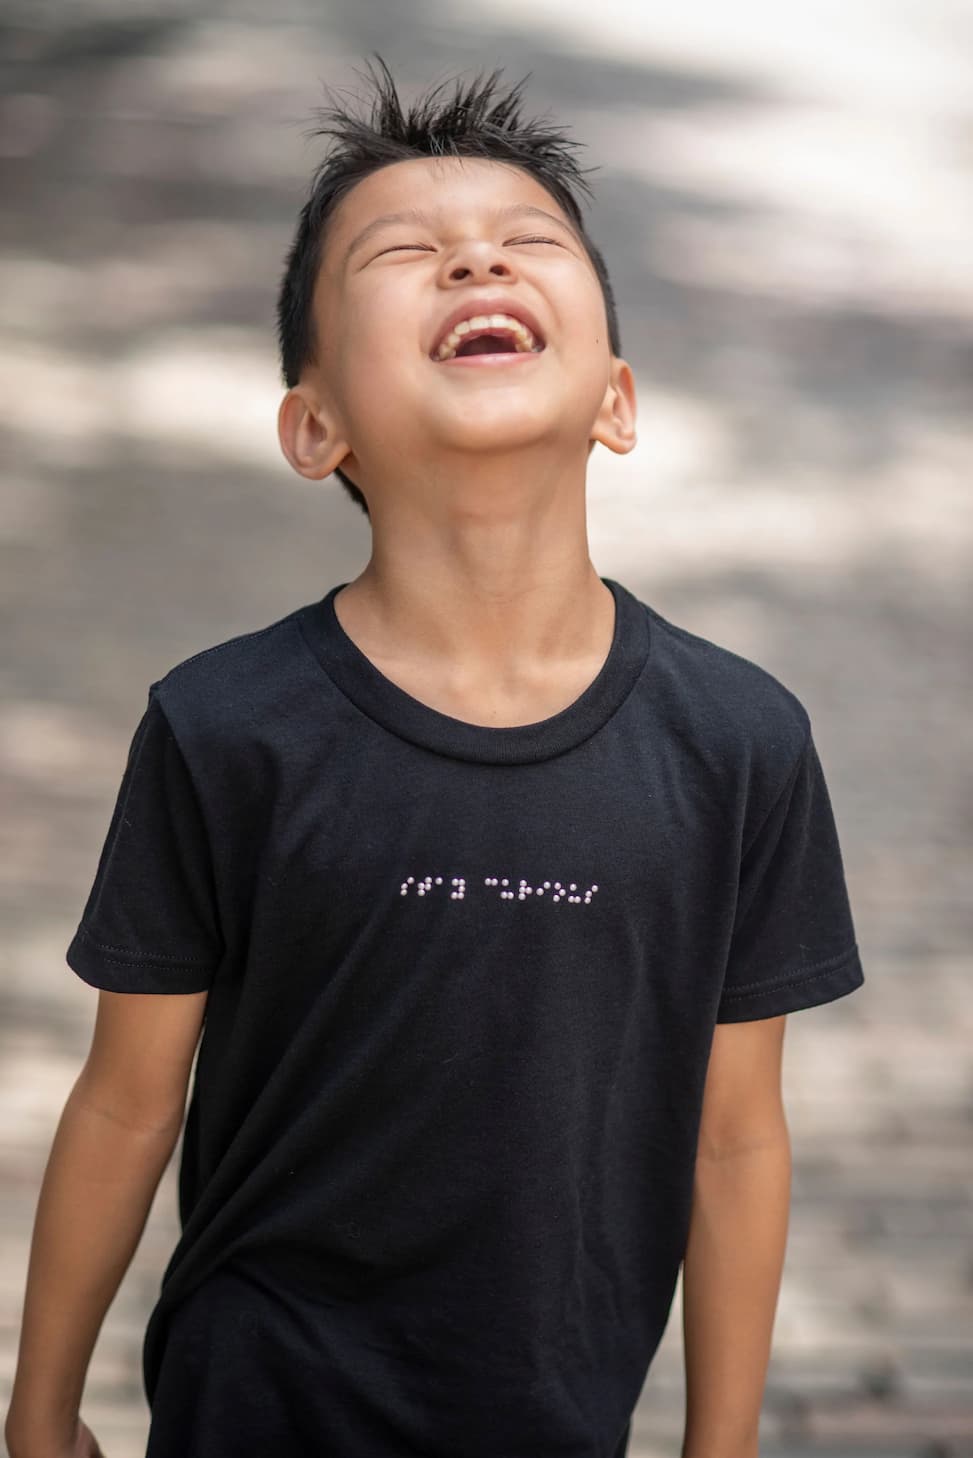 A young boy is wearing a braille t-shirt, looking up, and has the biggest smile on his face.